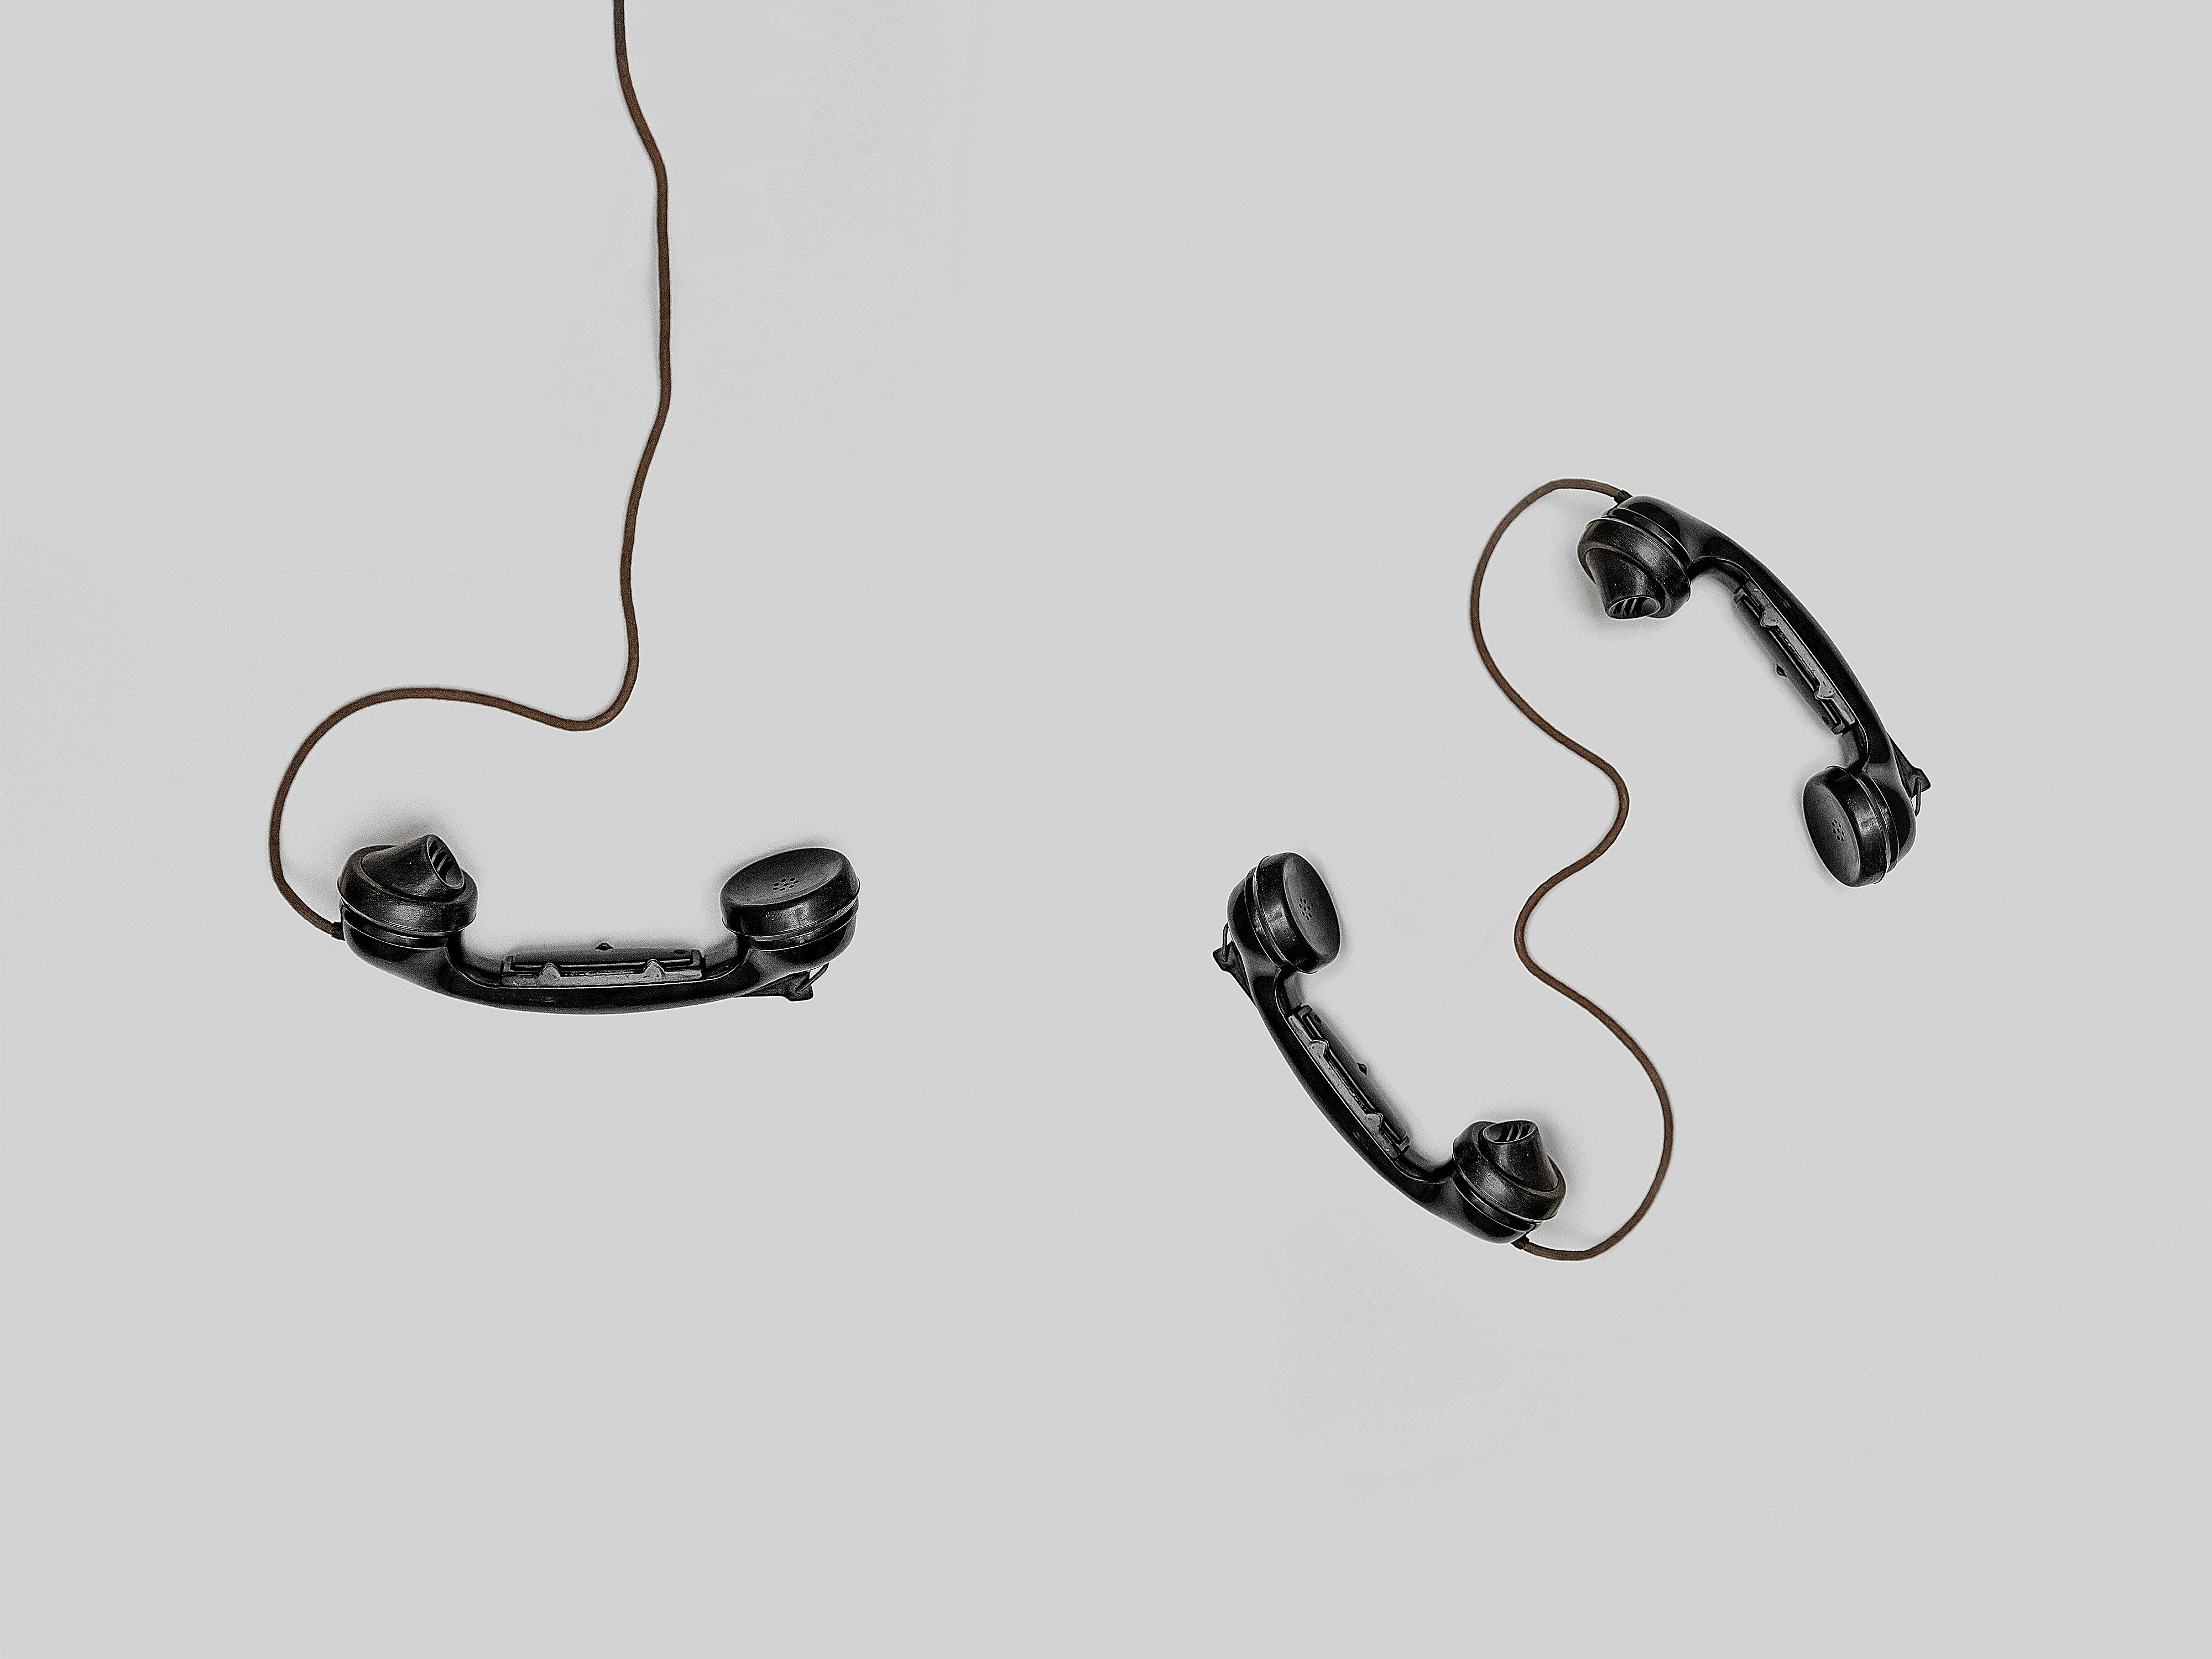 minimalism, telephones, vintage, cable, bw, chb, wire, telephone, handsets, classical